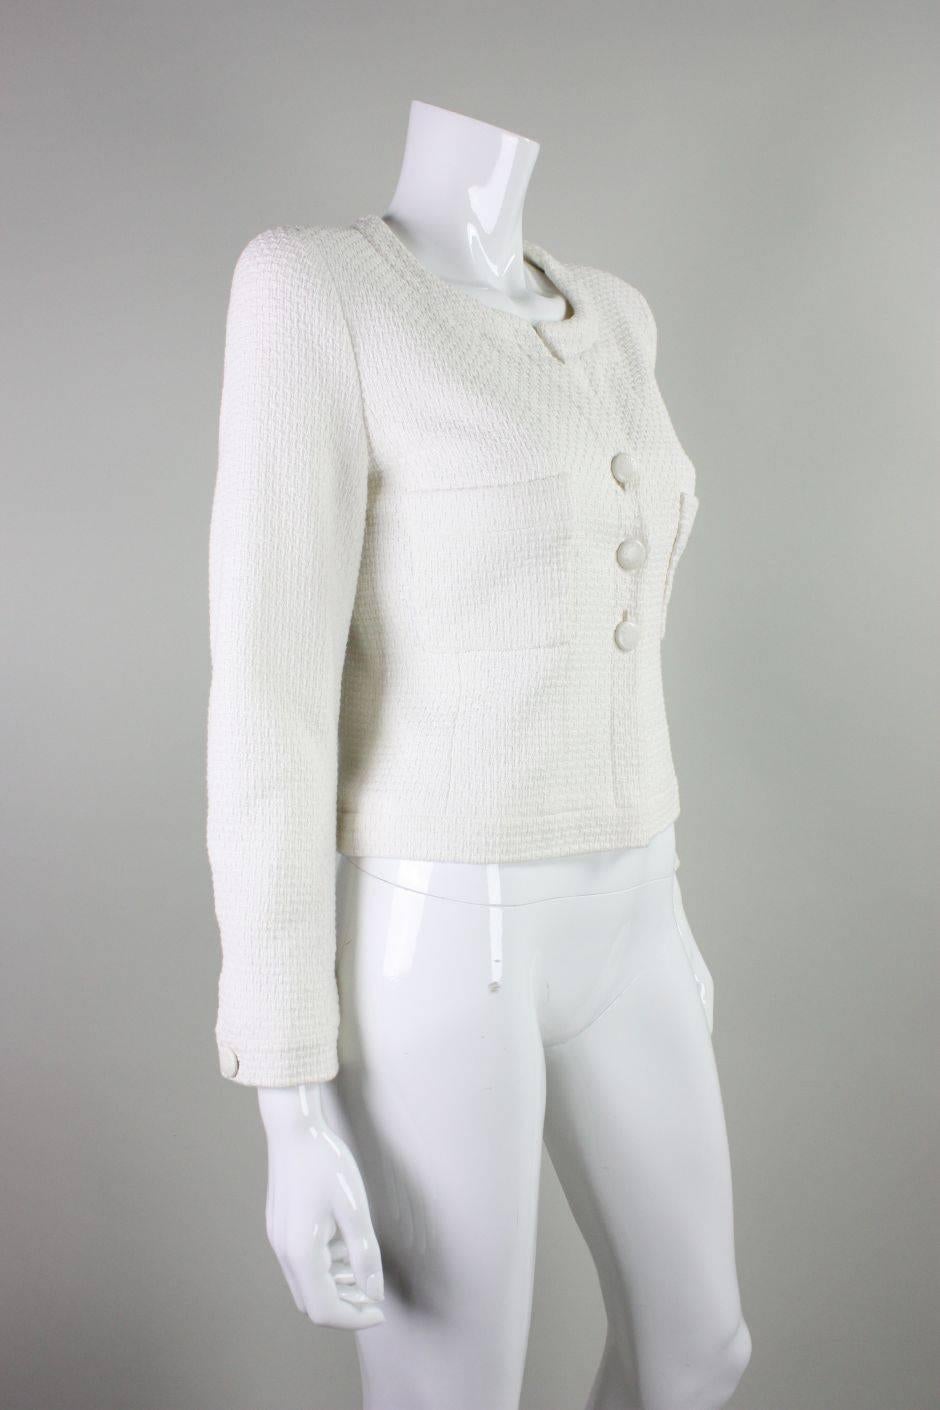 Vintage cropped jacket from Chanel dates to 1998 and is made of  white textured cotton.  Two patch breast pockets.  Three center front button closures.  Long sleeves with single buttoned cuffs.  Interior gold chain at waist.  
Labeled a size